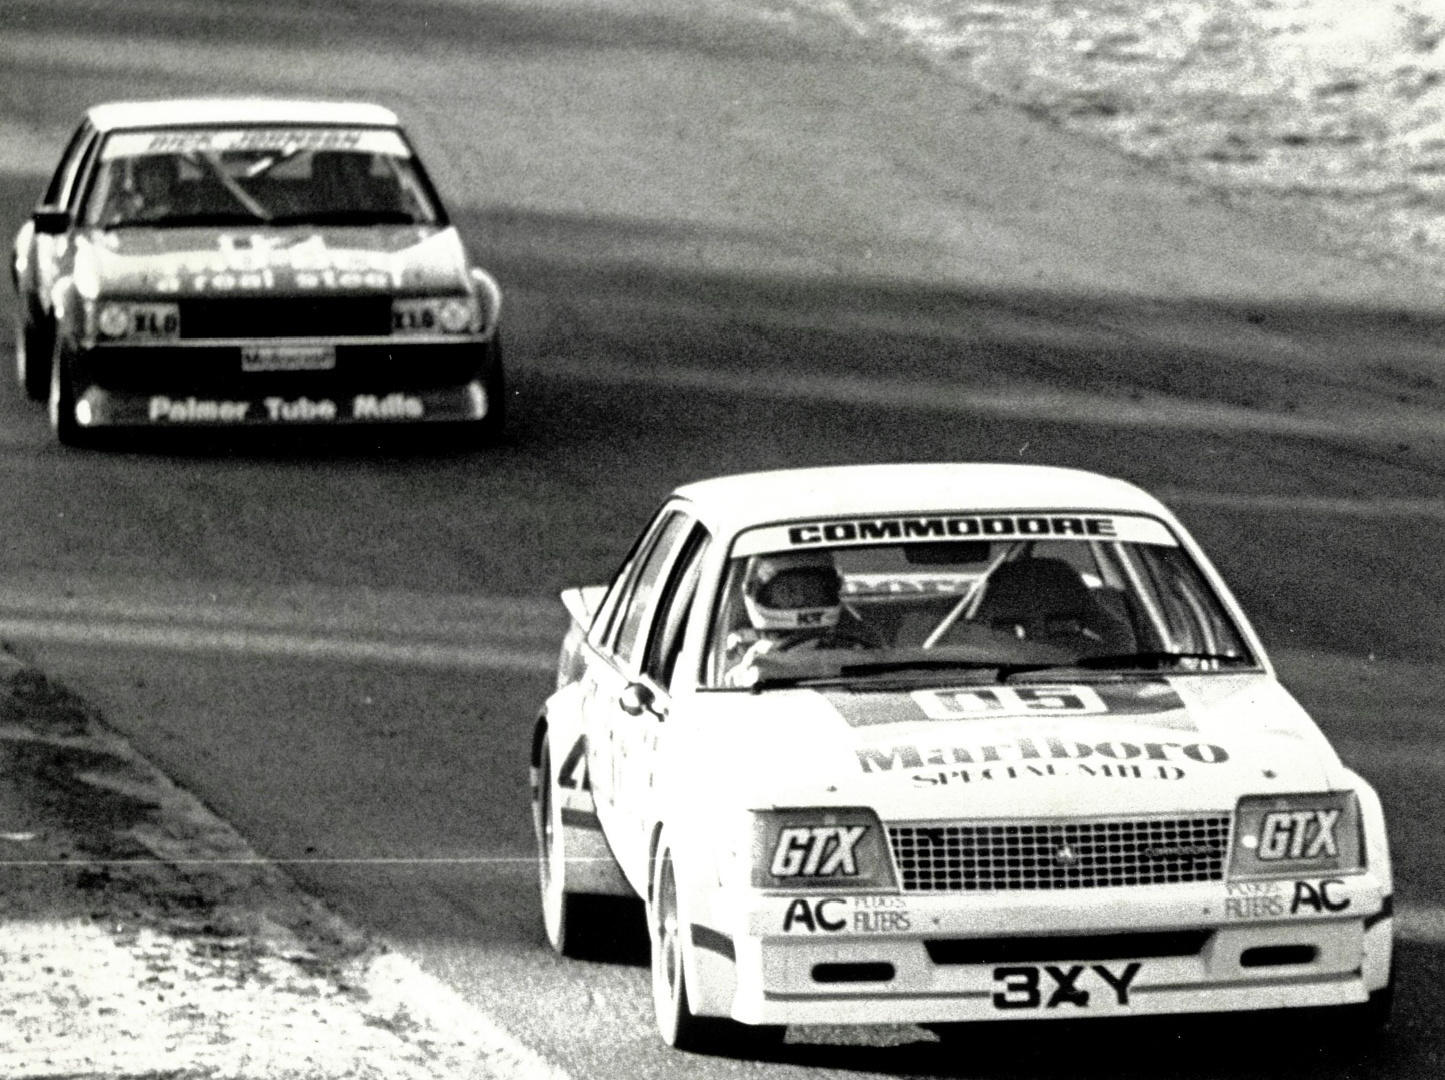 Holden Commodore set to join Touring Car Masters - Photo: Auto Action Archive